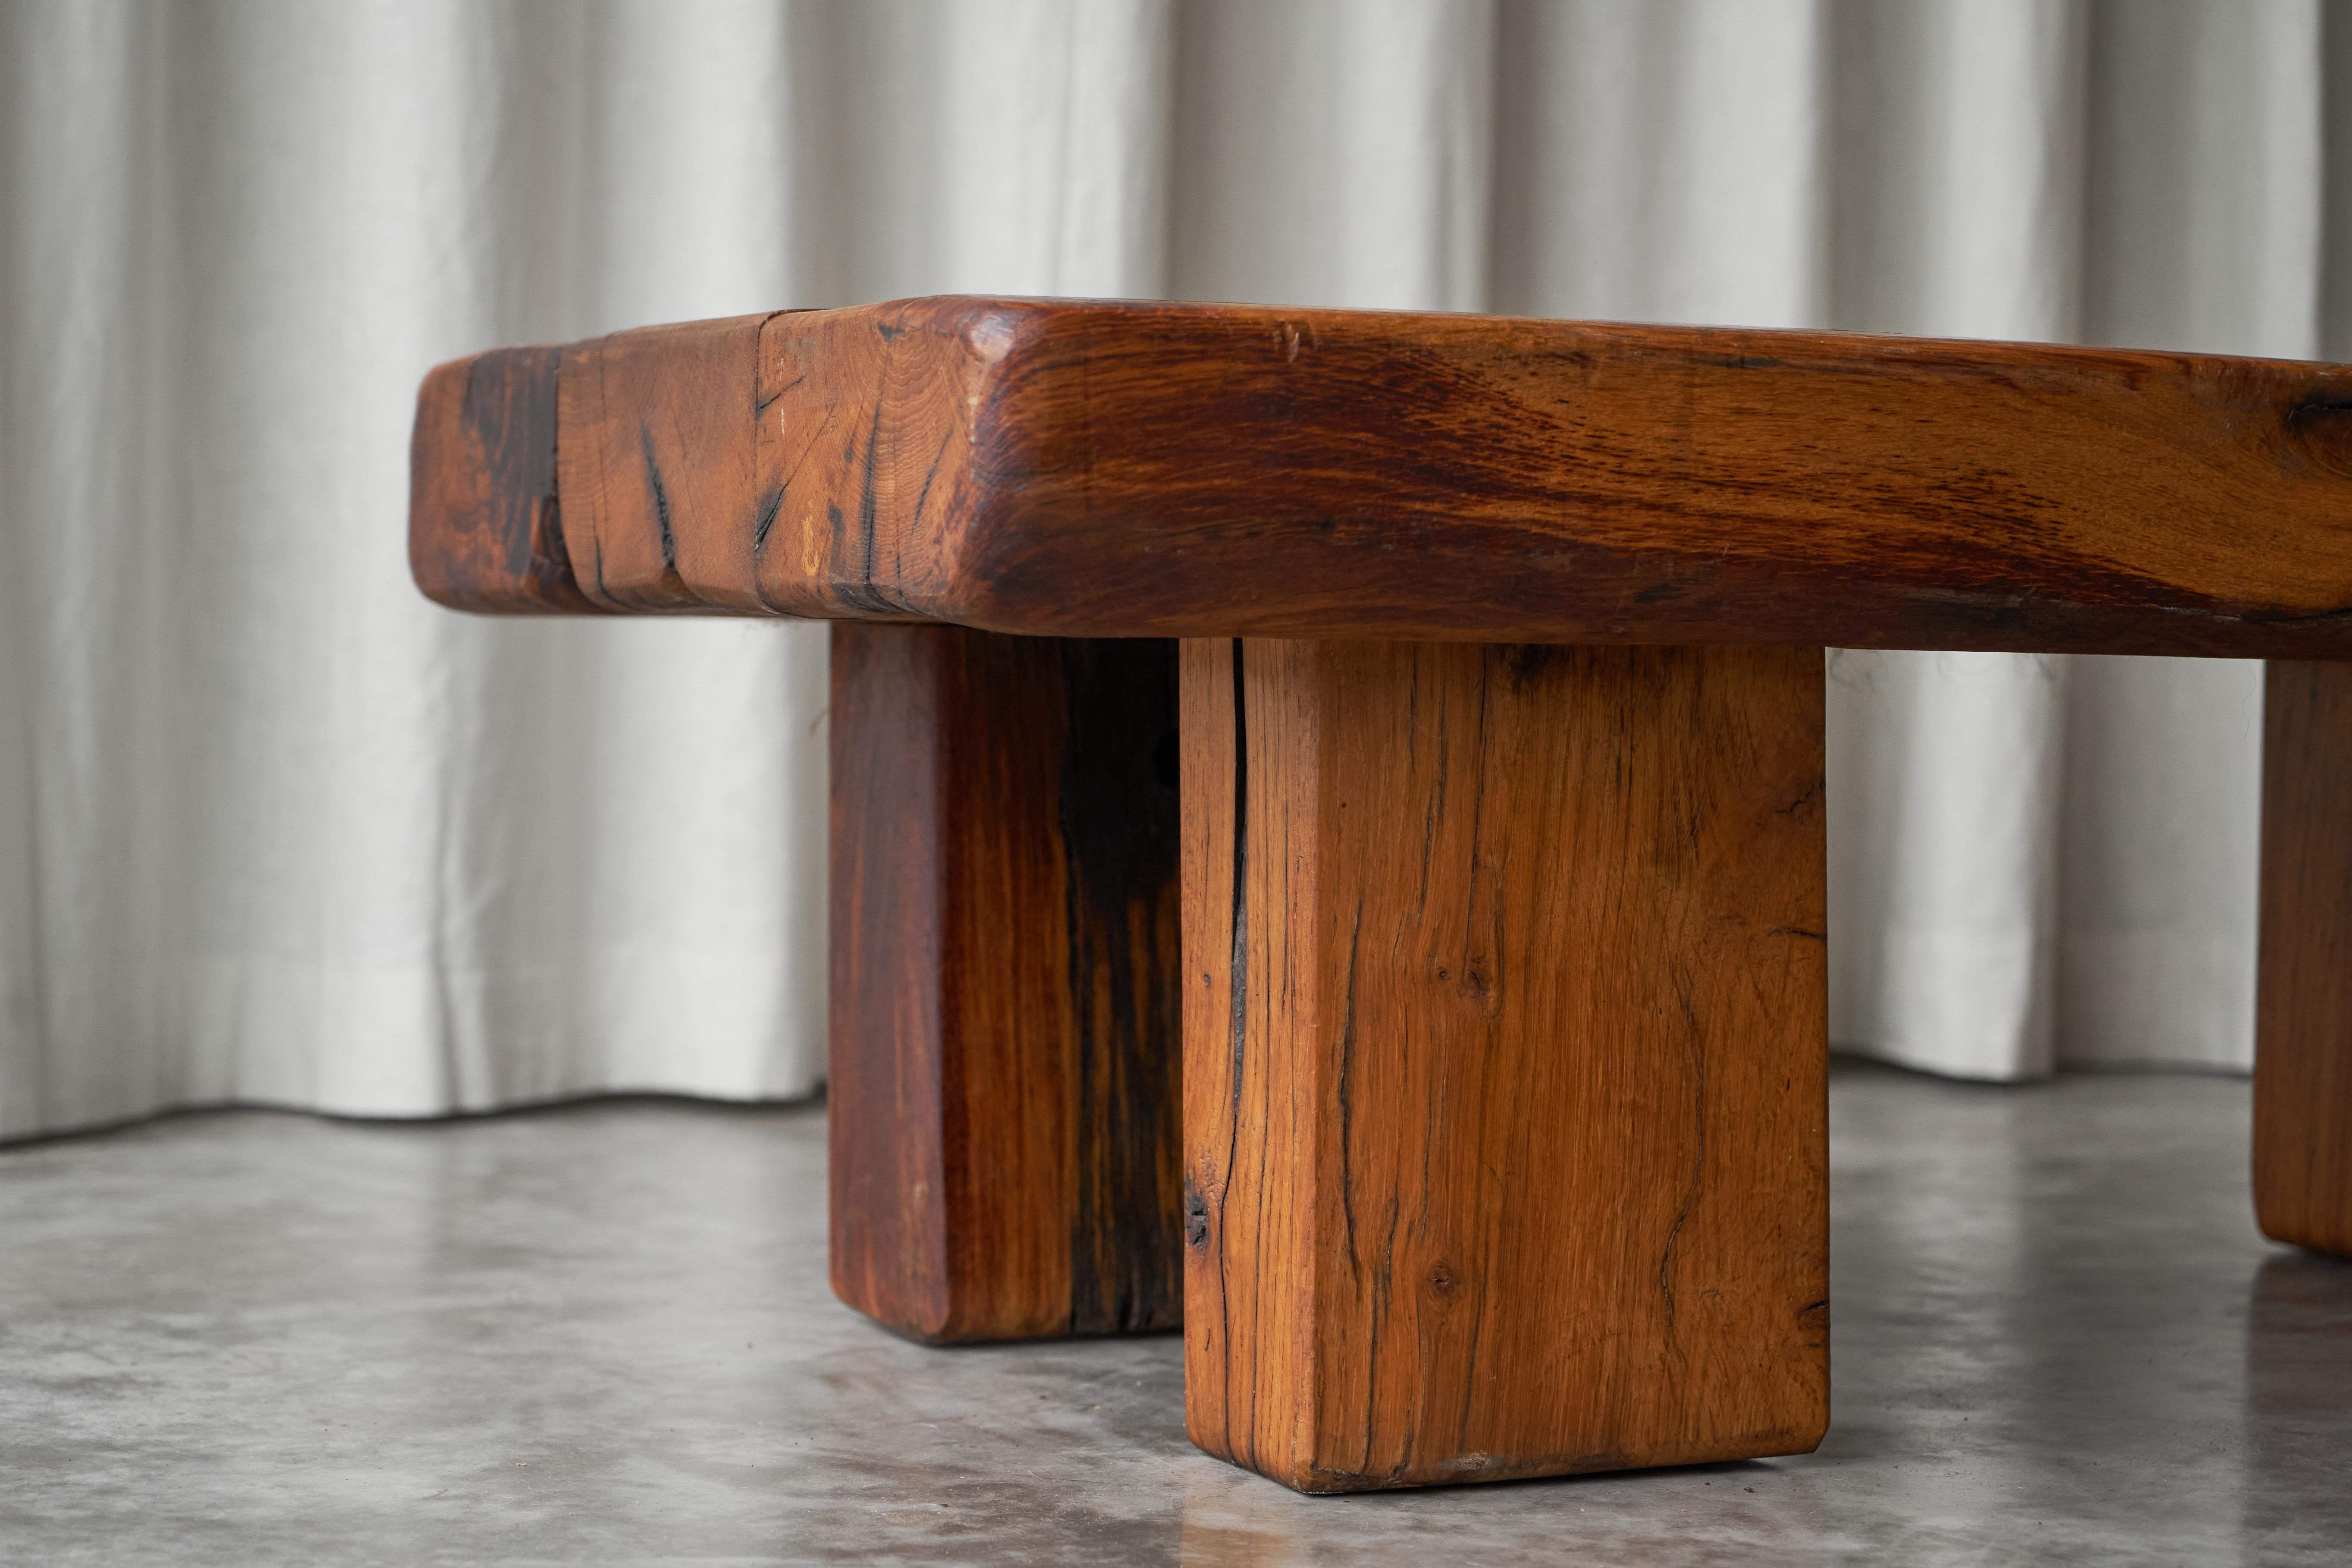 Hand-Crafted Brutalist Solid Oak Beam Coffee Table, Europe 1970s For Sale